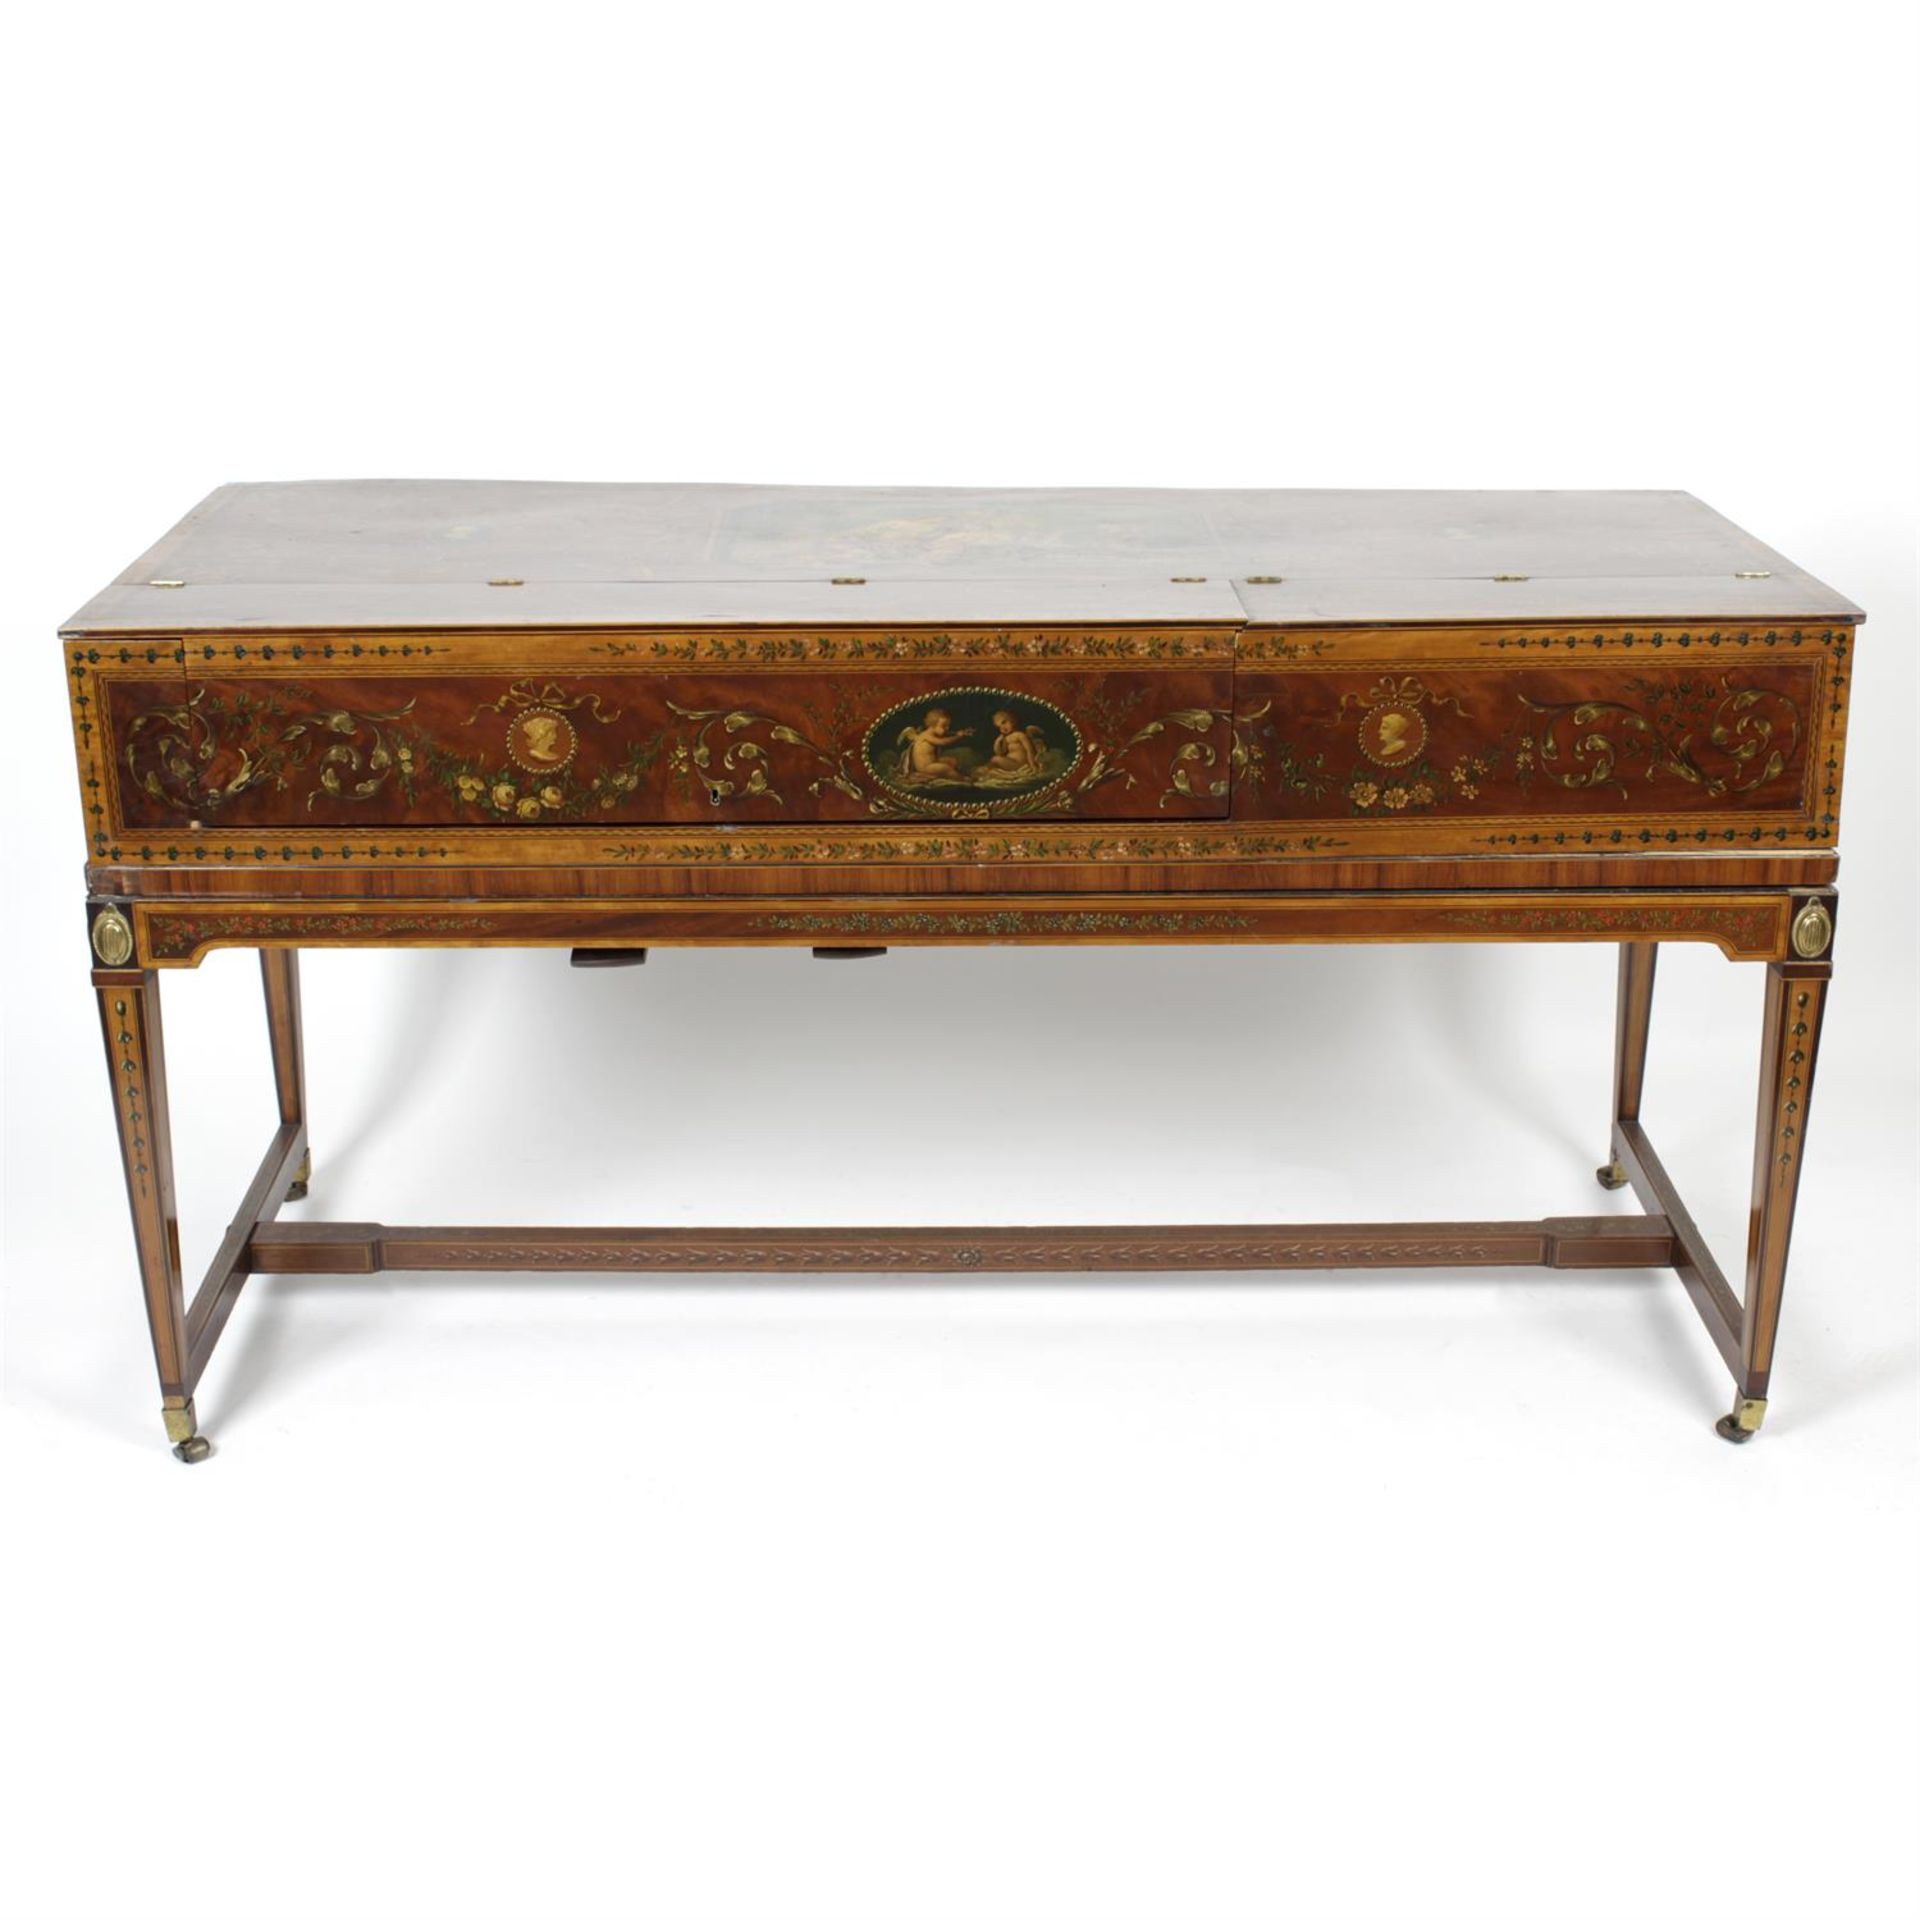 A late 18th to early 19th century painted satinwood rectangular cased piano.